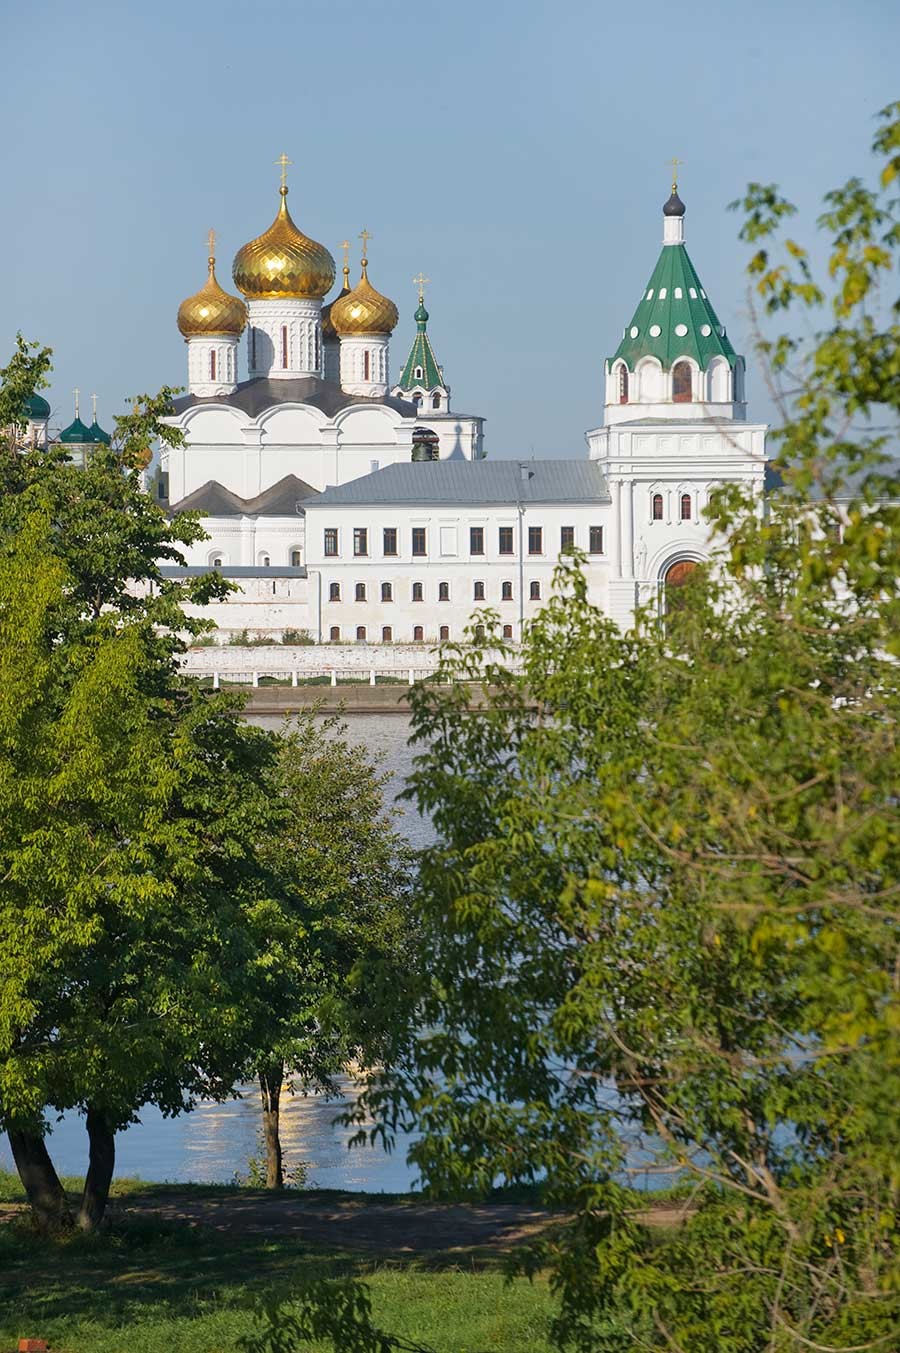  Trinity-Ipatiev Monastery, east view across Kostroma River. From left: Trinity Cathedral; Archbishop's Cloisters with Gate Church of Sts. Chrysanthus & Daria. Aug. 13, 2017